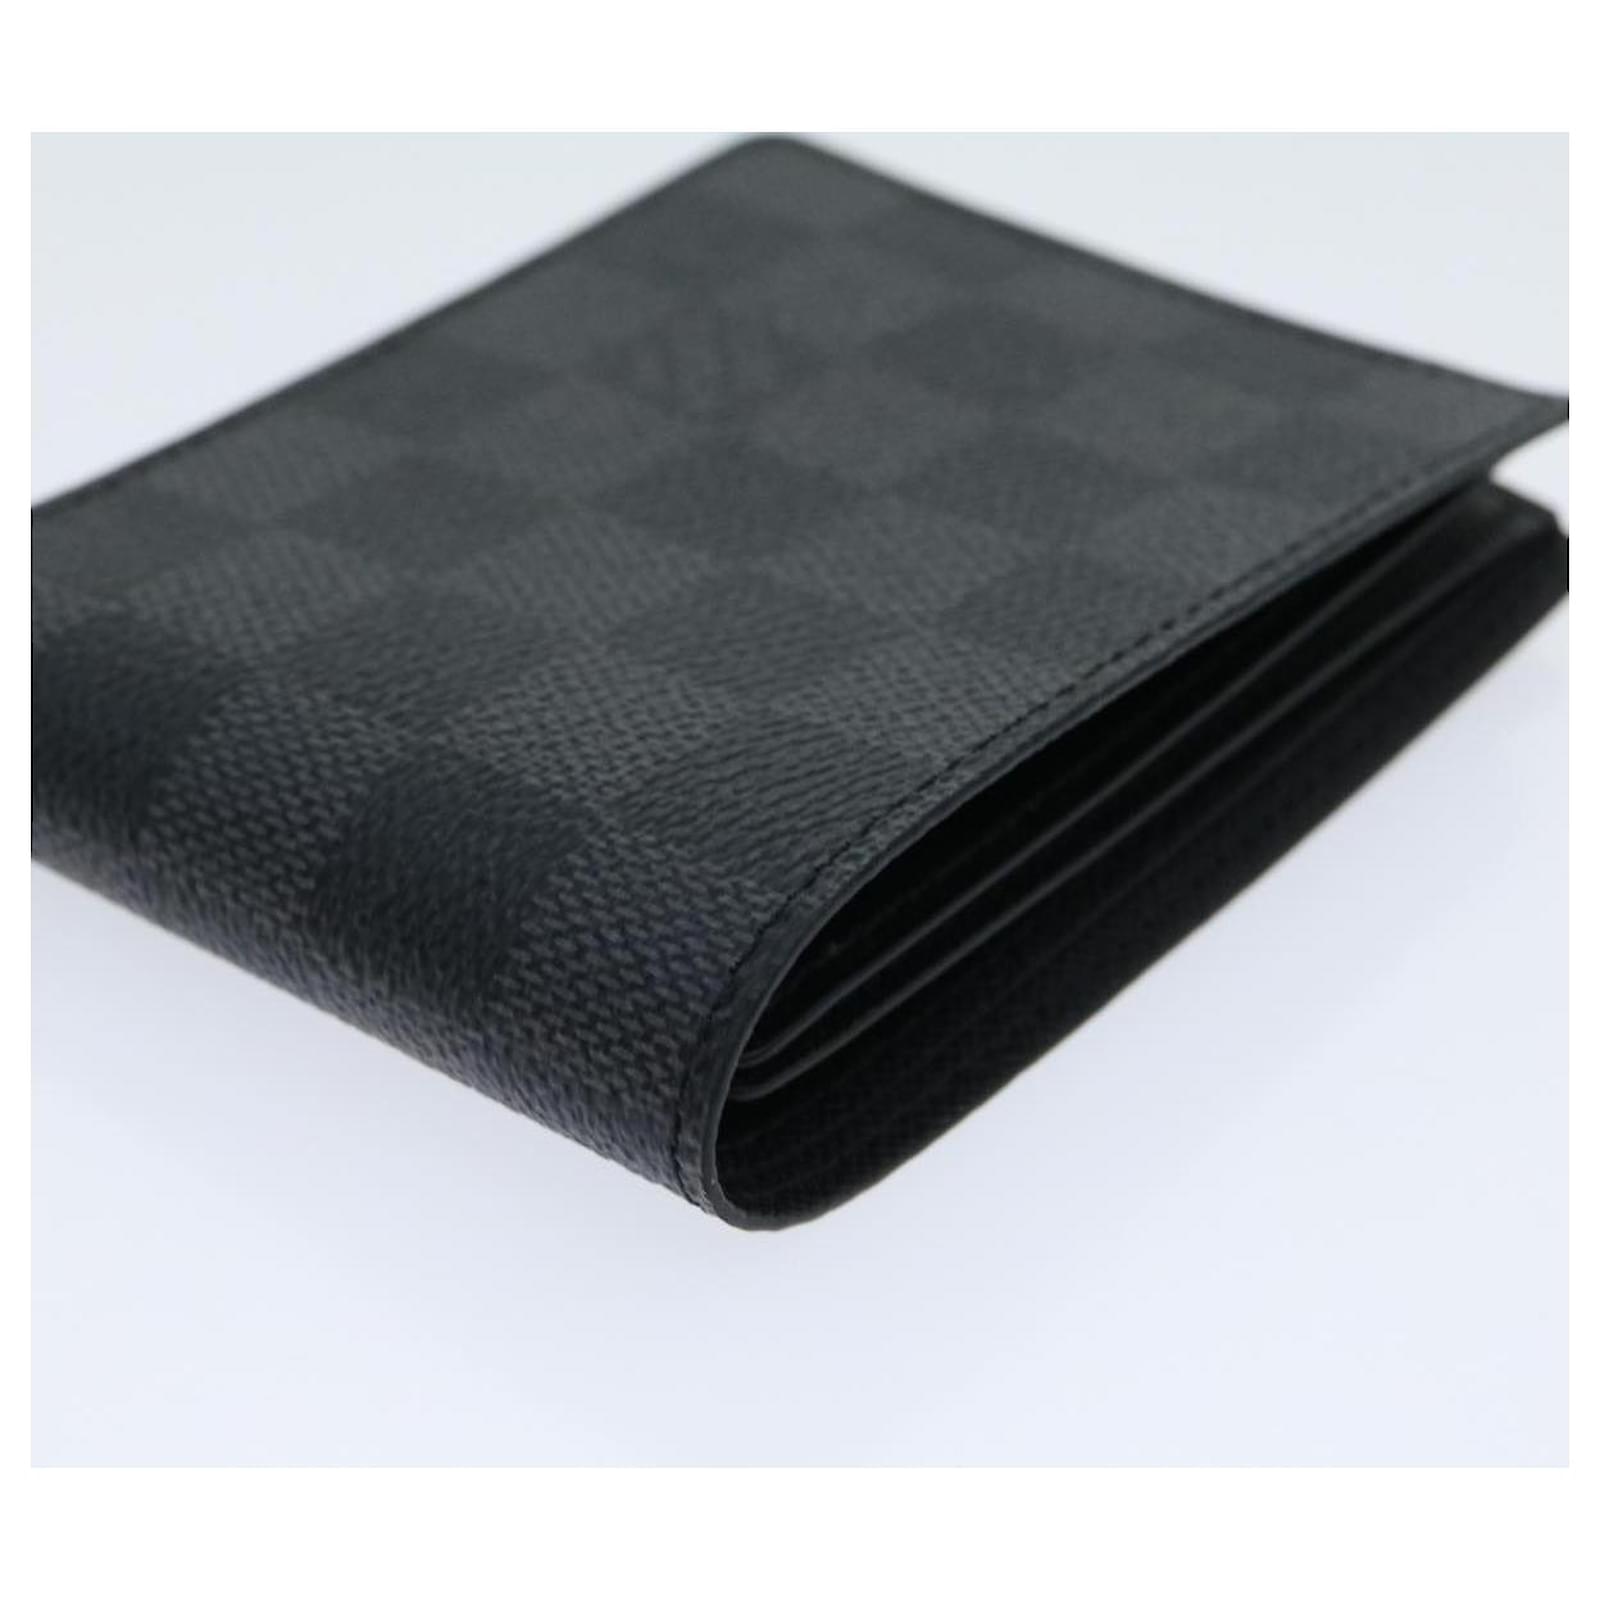 LOUIS VUITTON Portefeuille Slender Wallet N63261｜Product  Code：2101215309471｜BRAND OFF Online Store